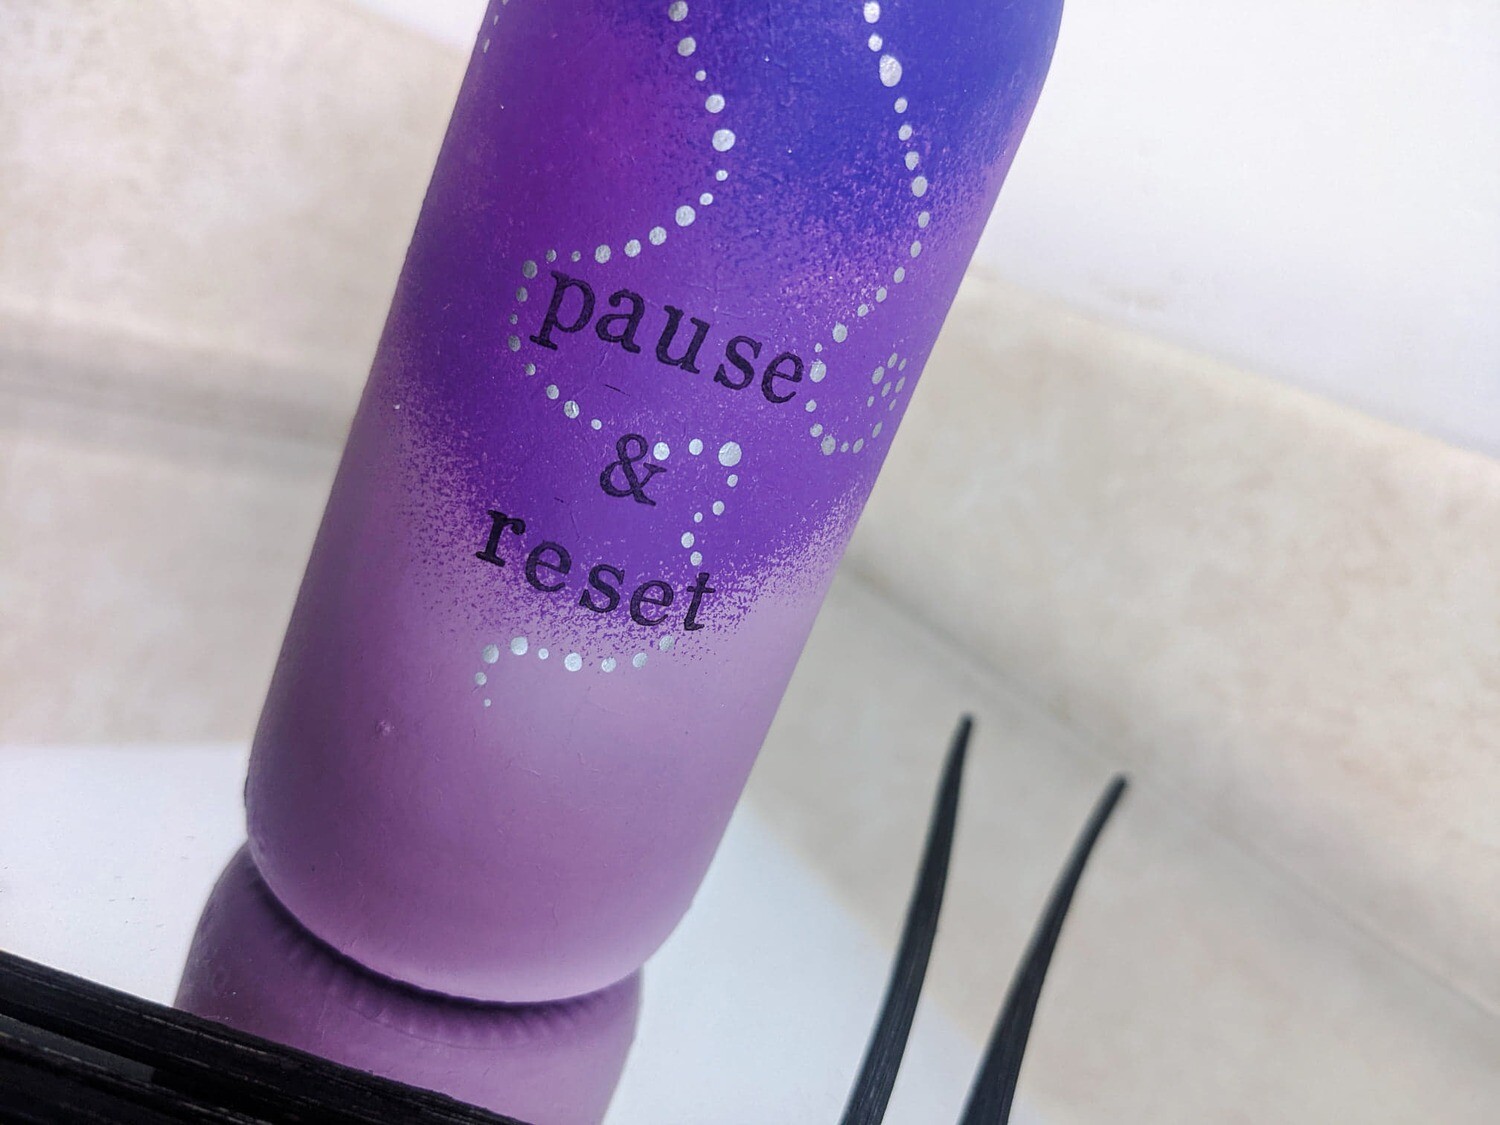 Pause & Reset Essential Oil Reed Diffuser